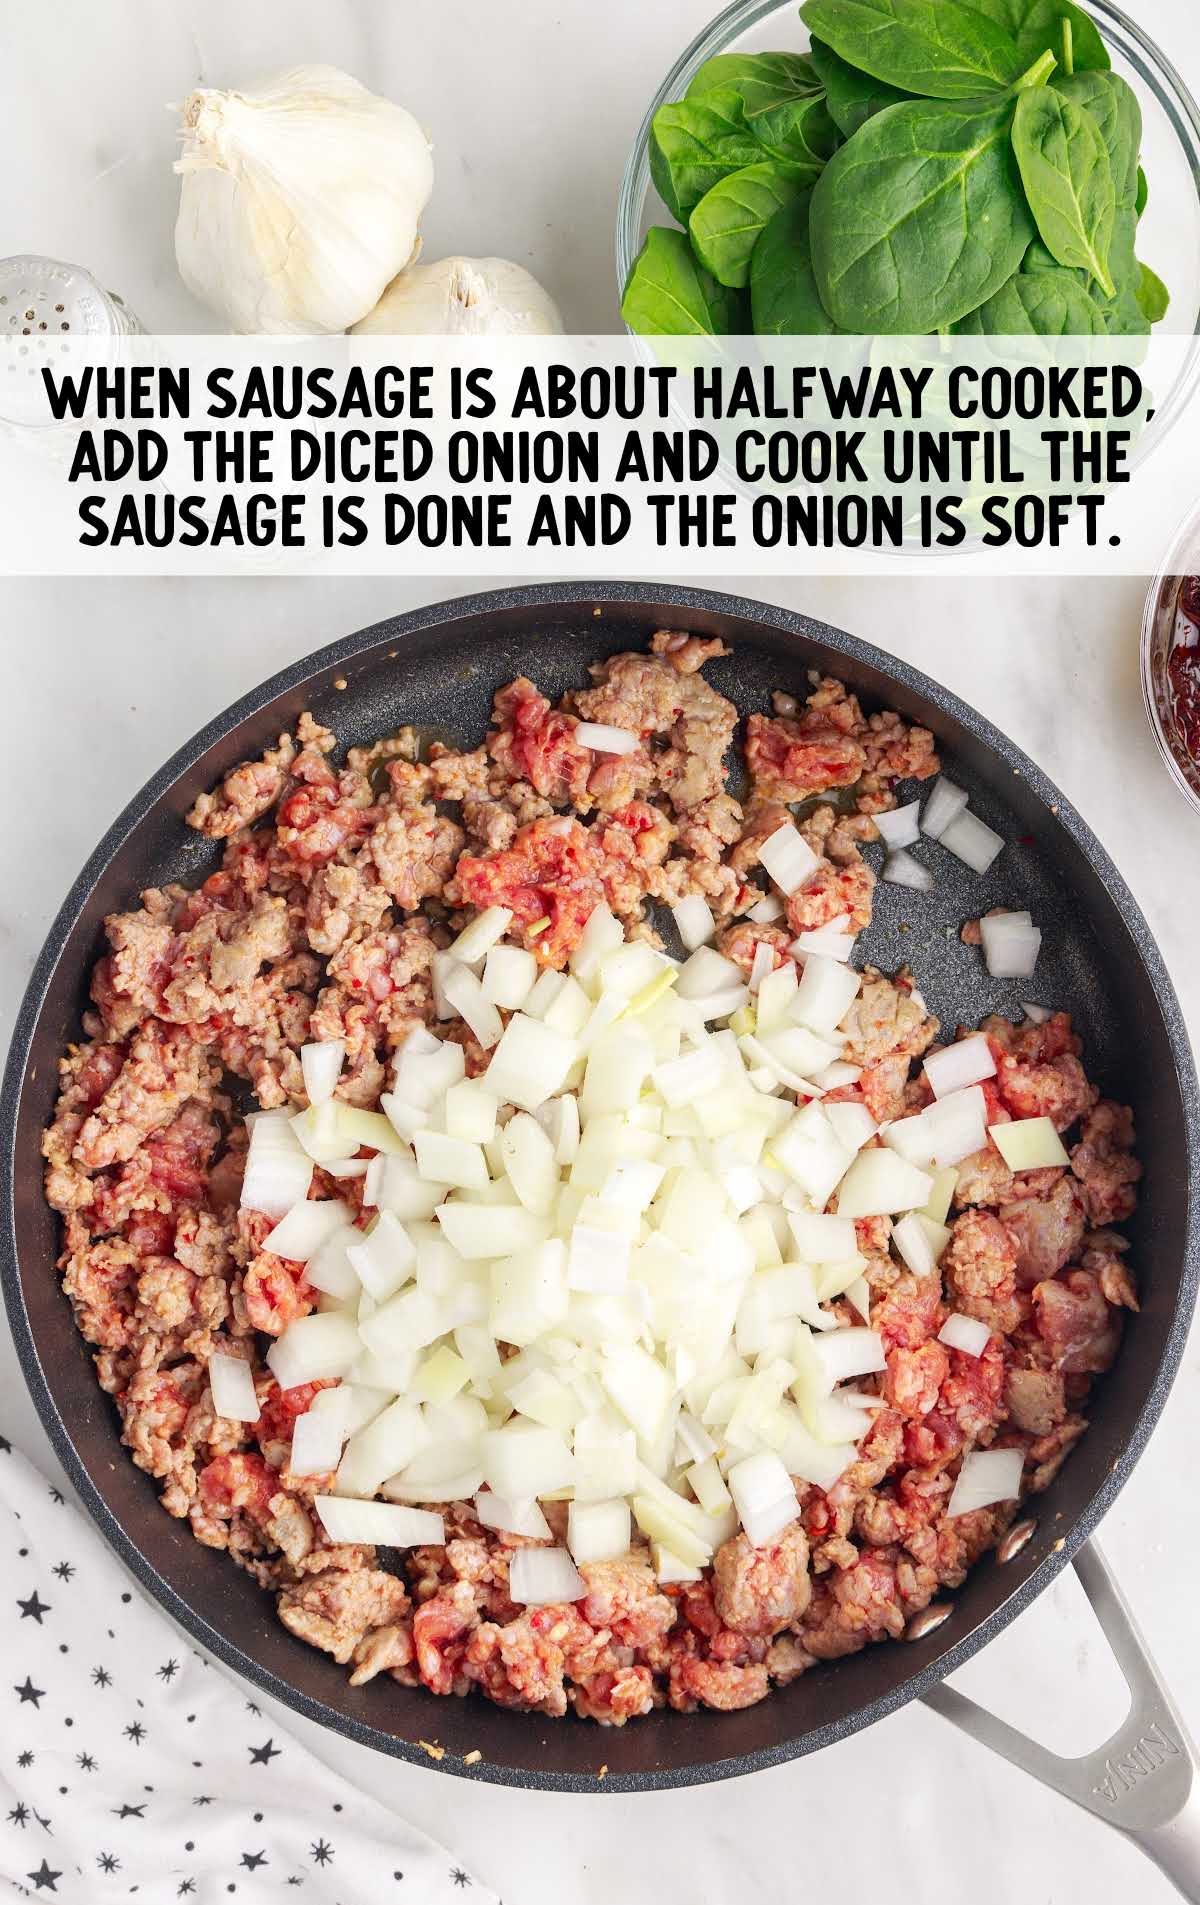 sausage and diced onion being cooked in a skillet